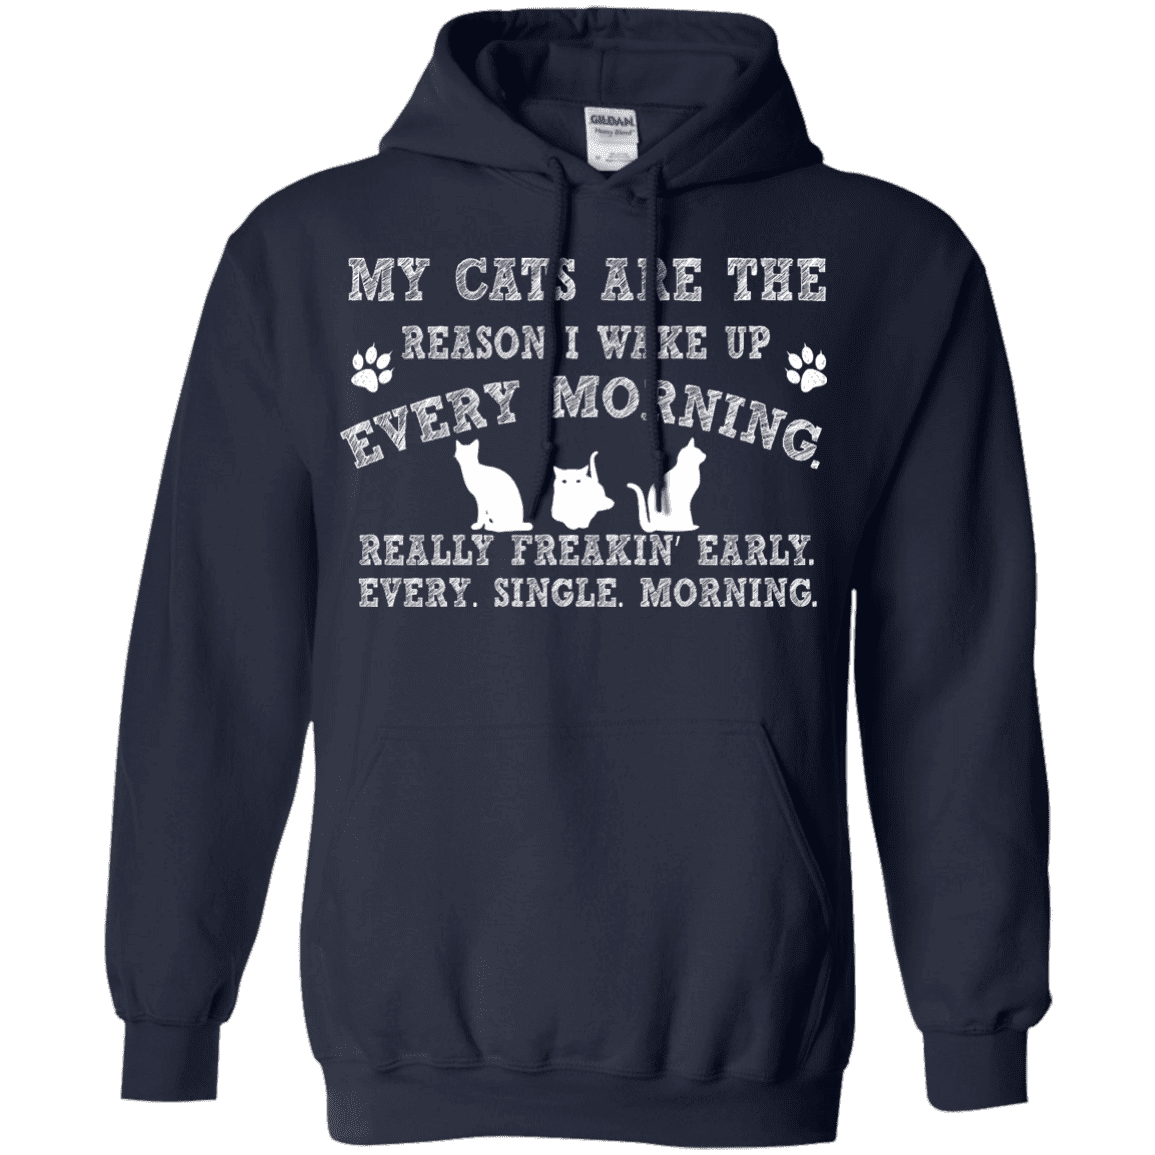 My Cats Are The Reason - Hoodie.